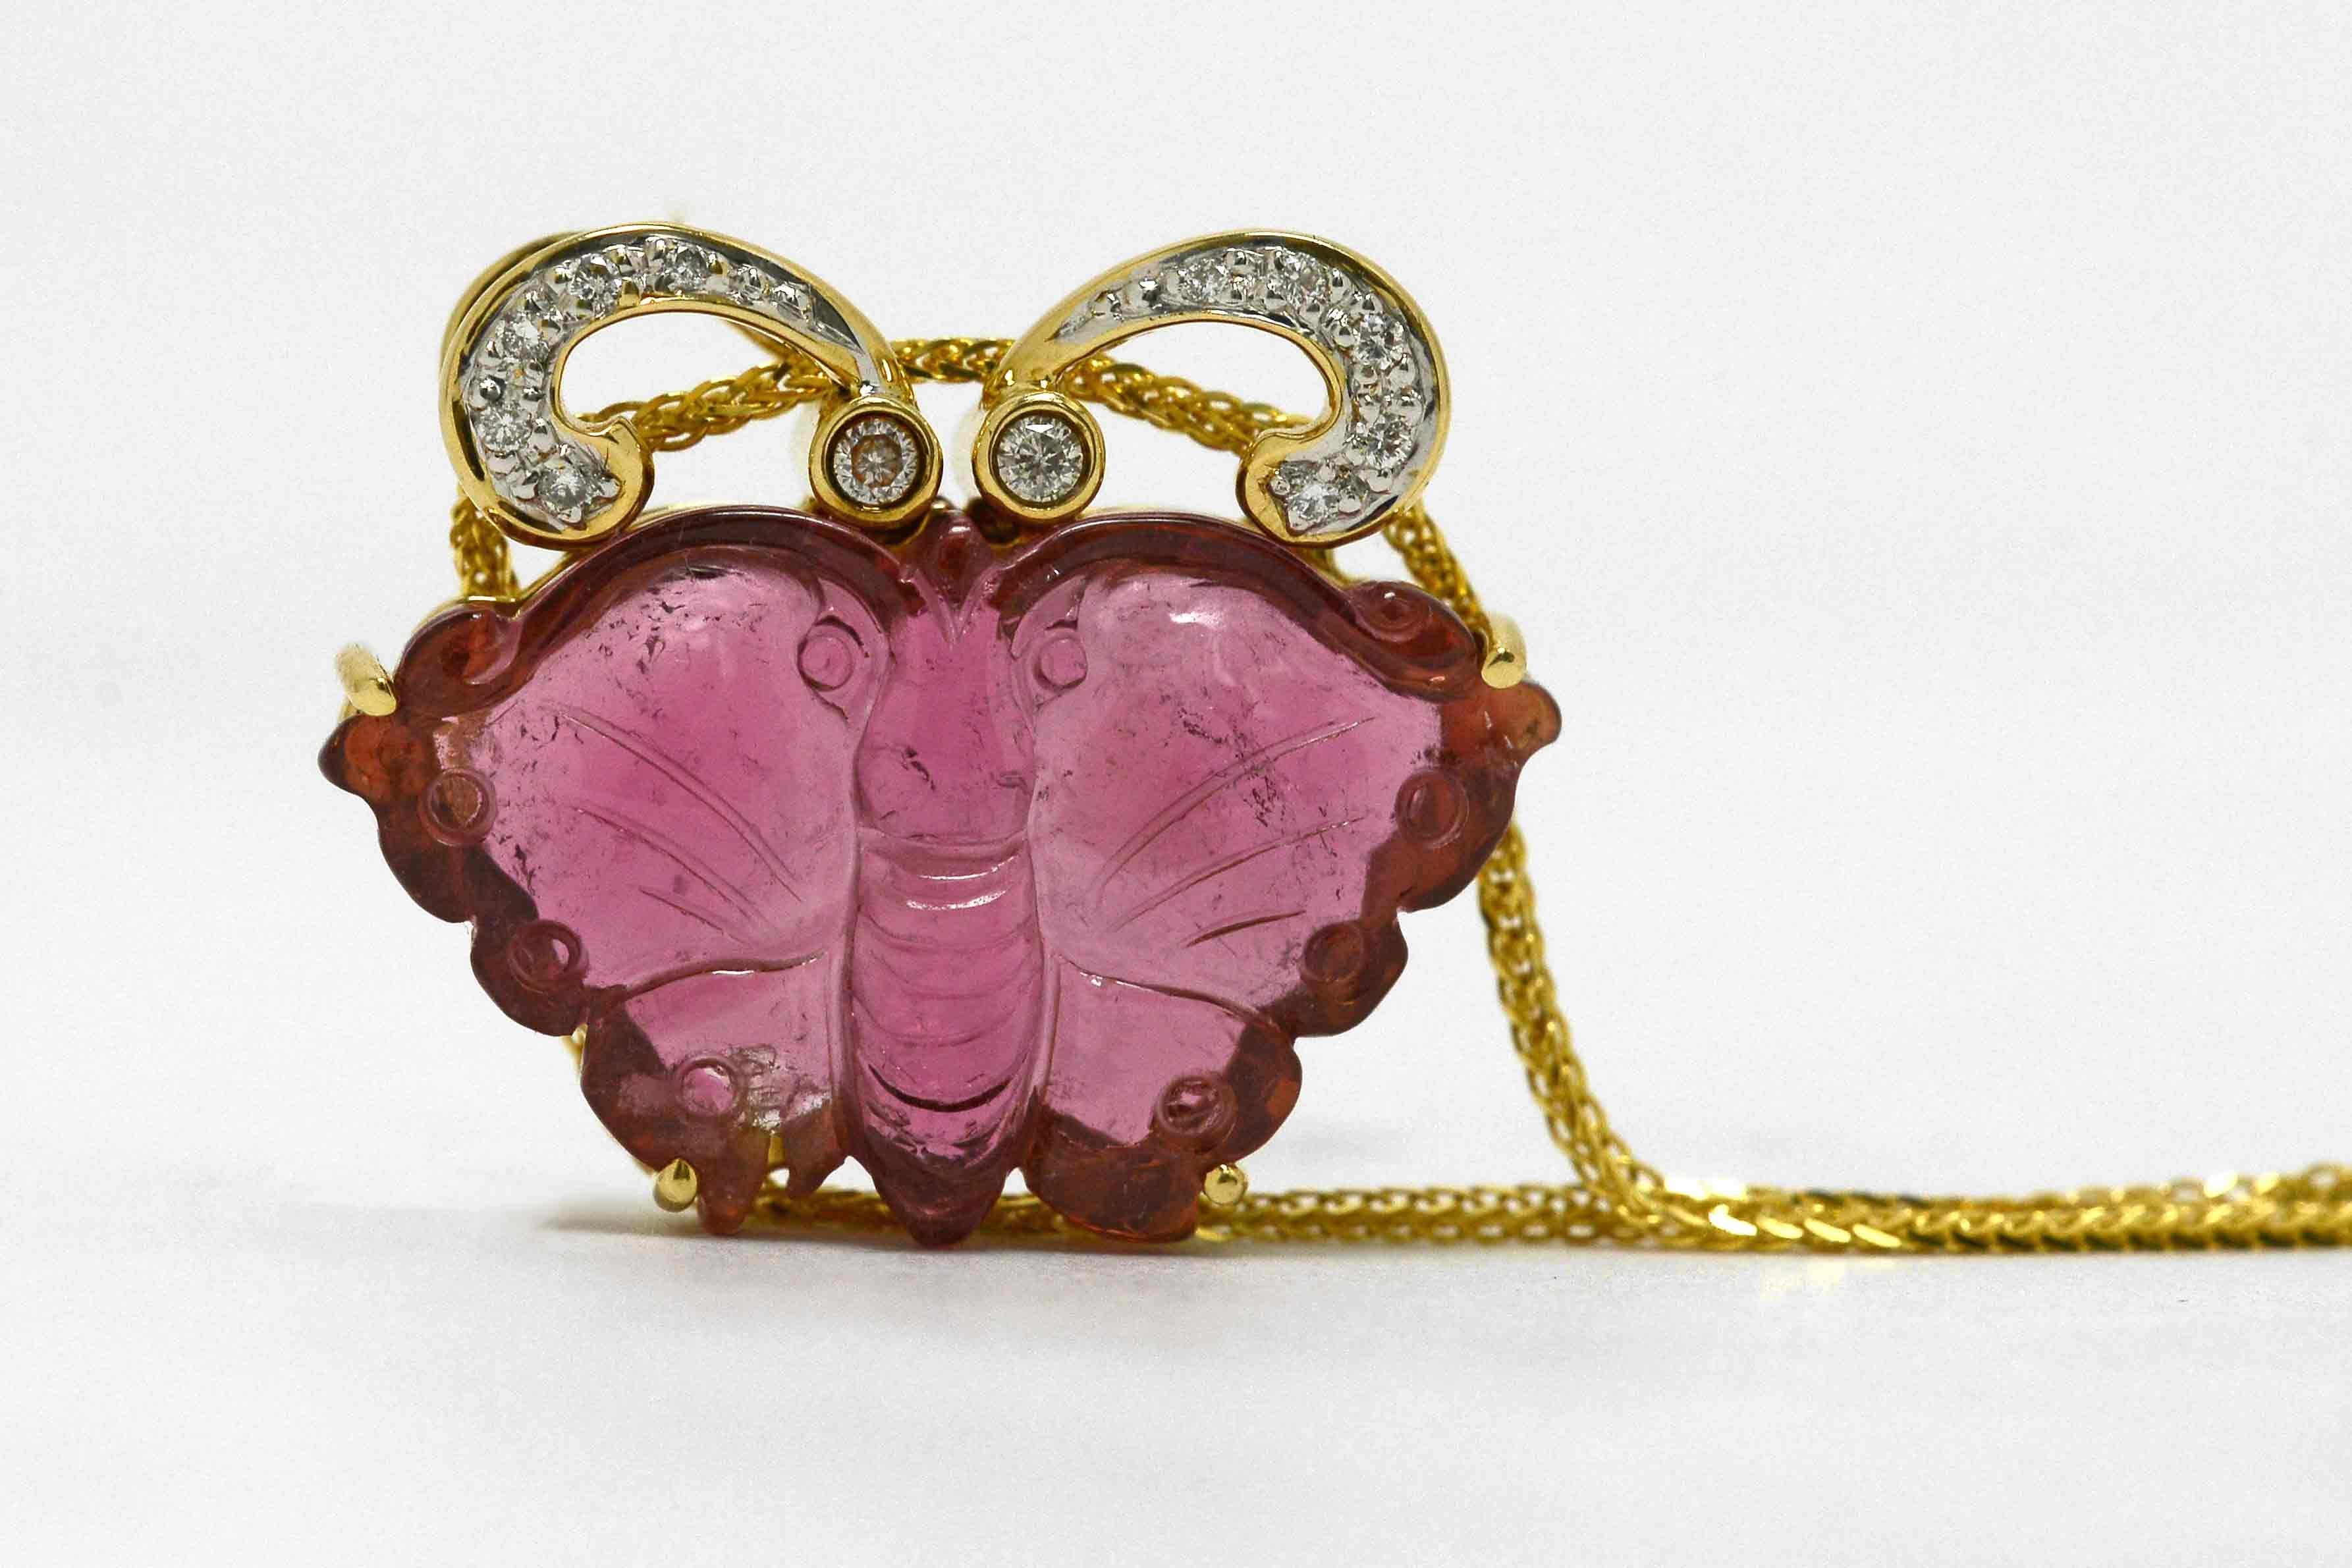 The Nogales Butterfly Necklace. Butterflies represent transformation, a very powerful theme. Here rendered in a beautifully hand carved rubellite tourmaline gemstone with diamond kissed antennae as a most alluring necklace. Naturalist forms came to